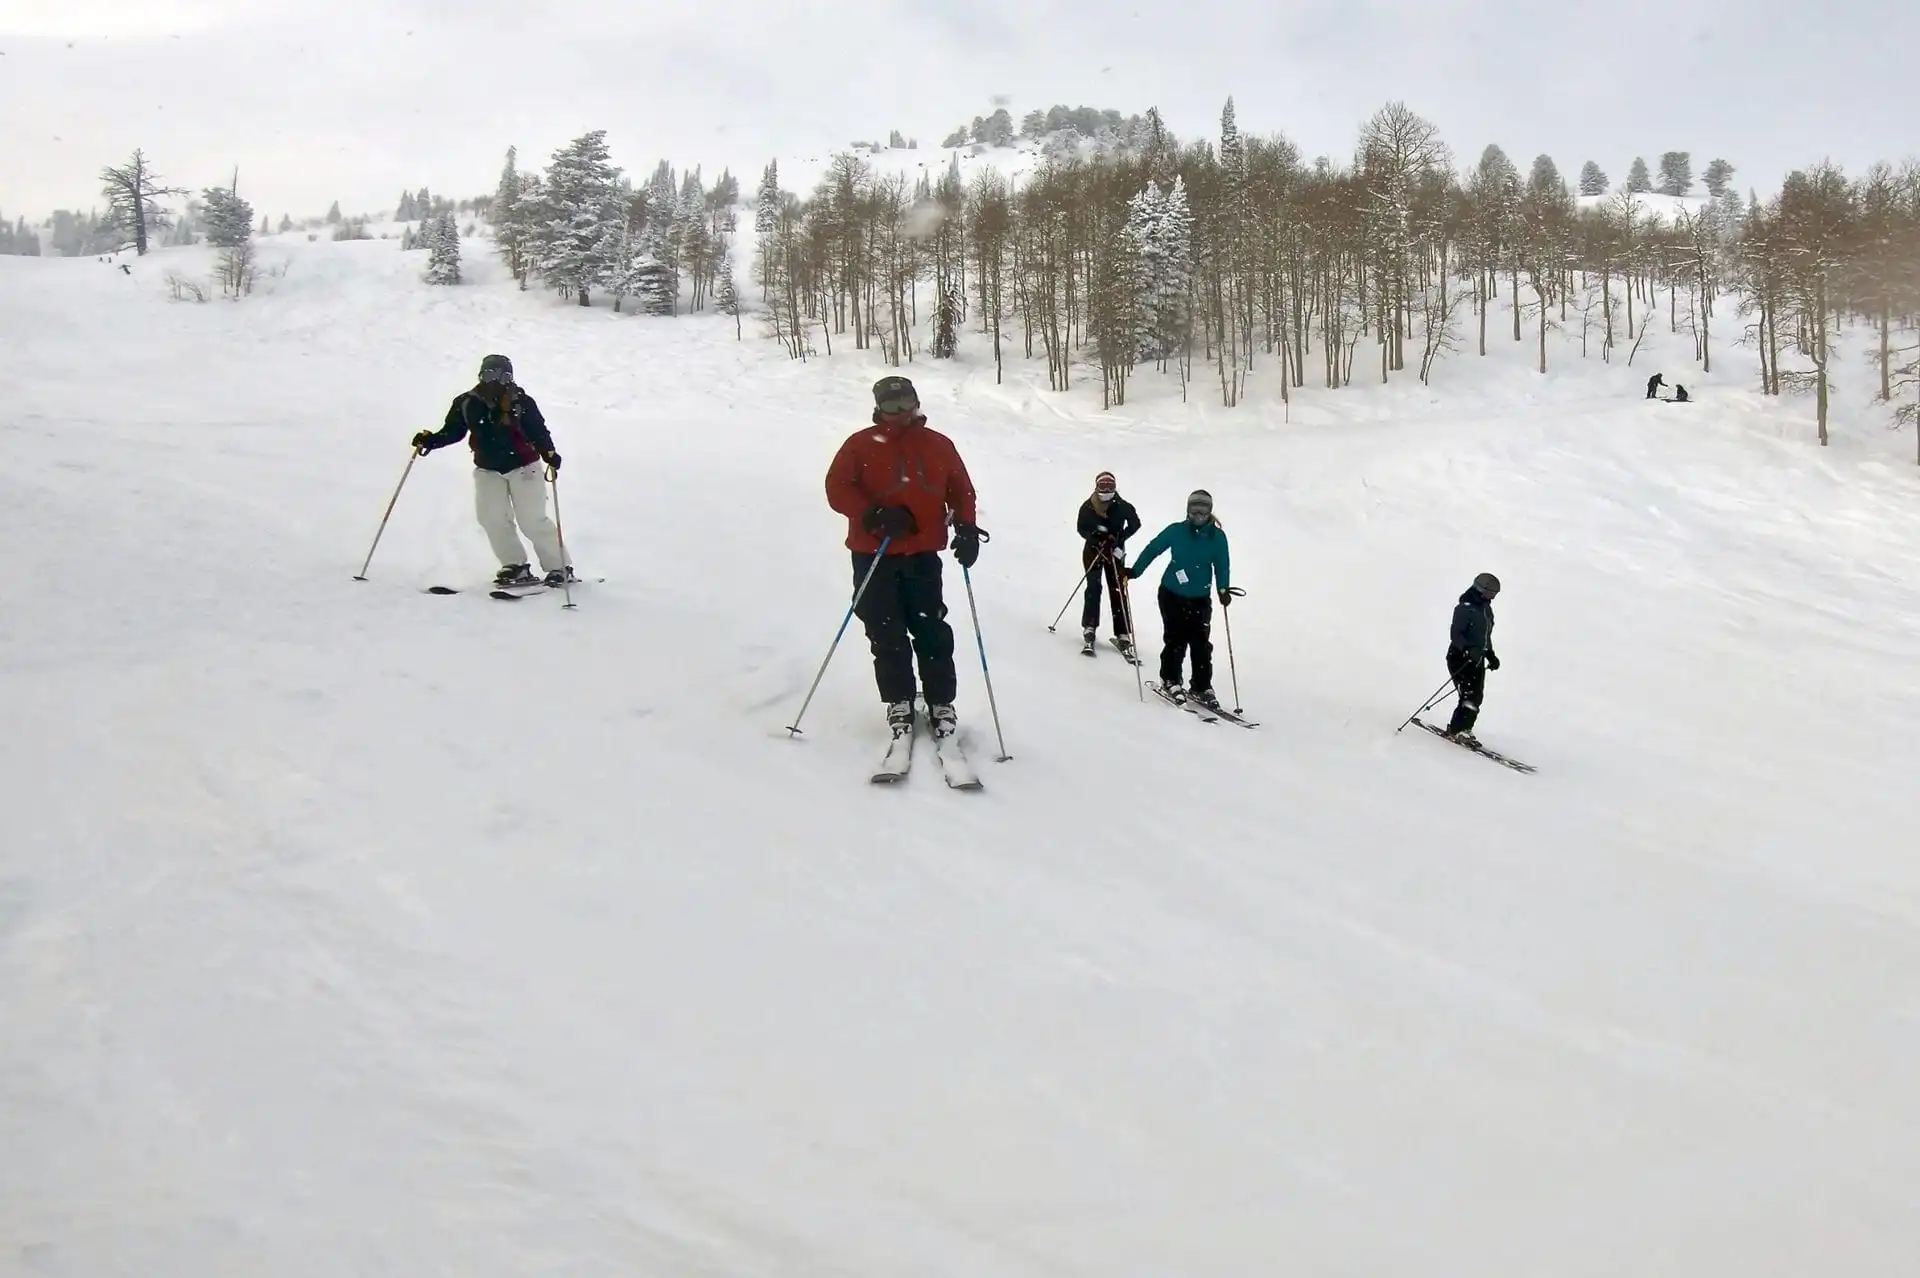 Everyone is bundled up and shredding the slopes at Powder Mountain